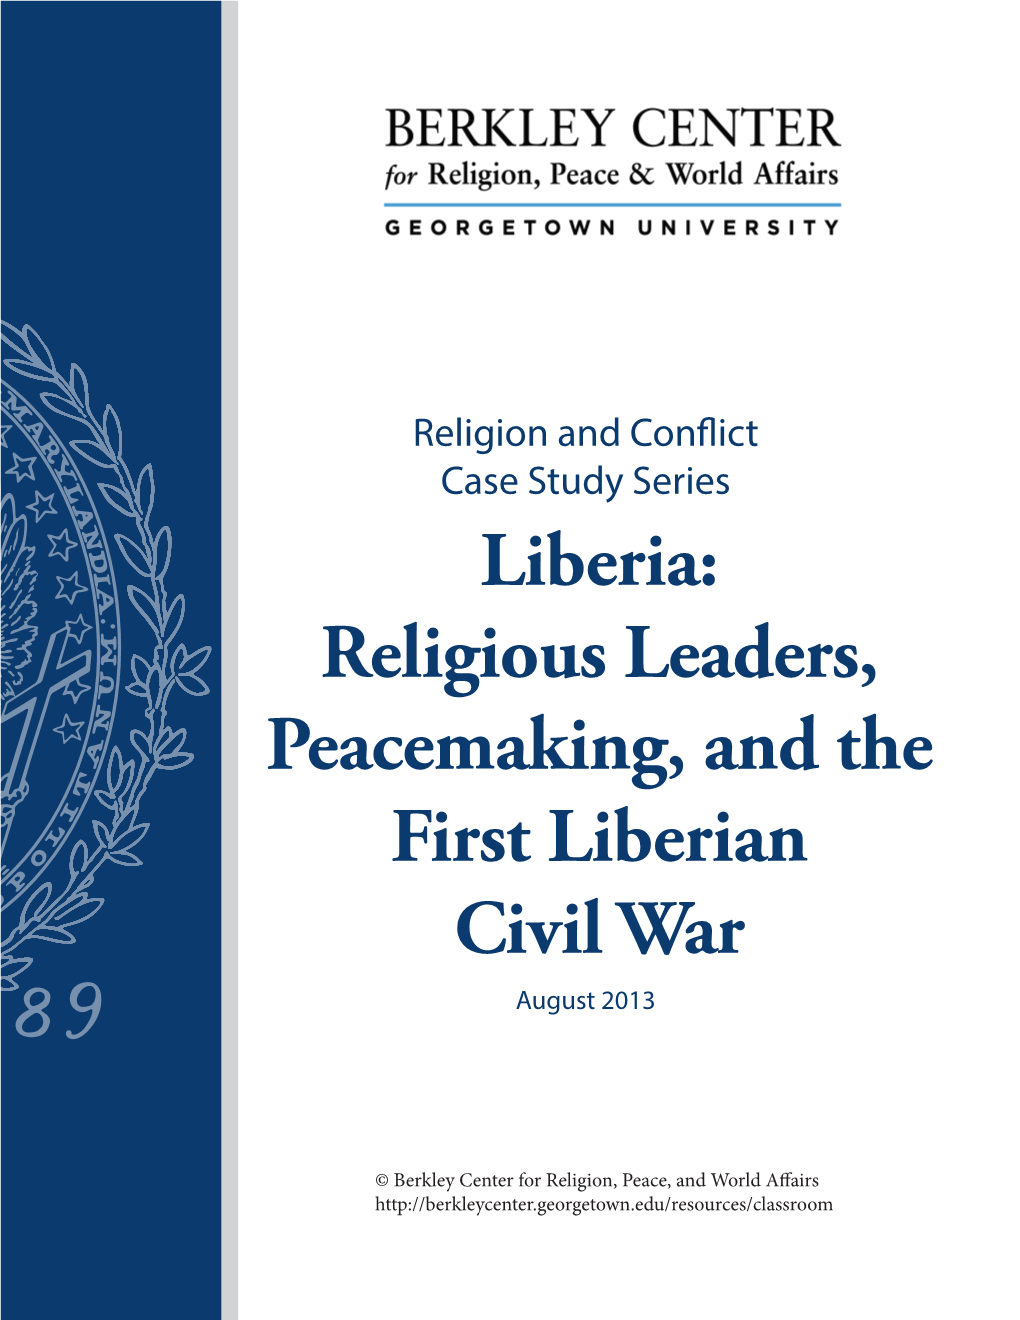 Religious Leaders, Peacemaking, and the First Liberian Civil War August 2013